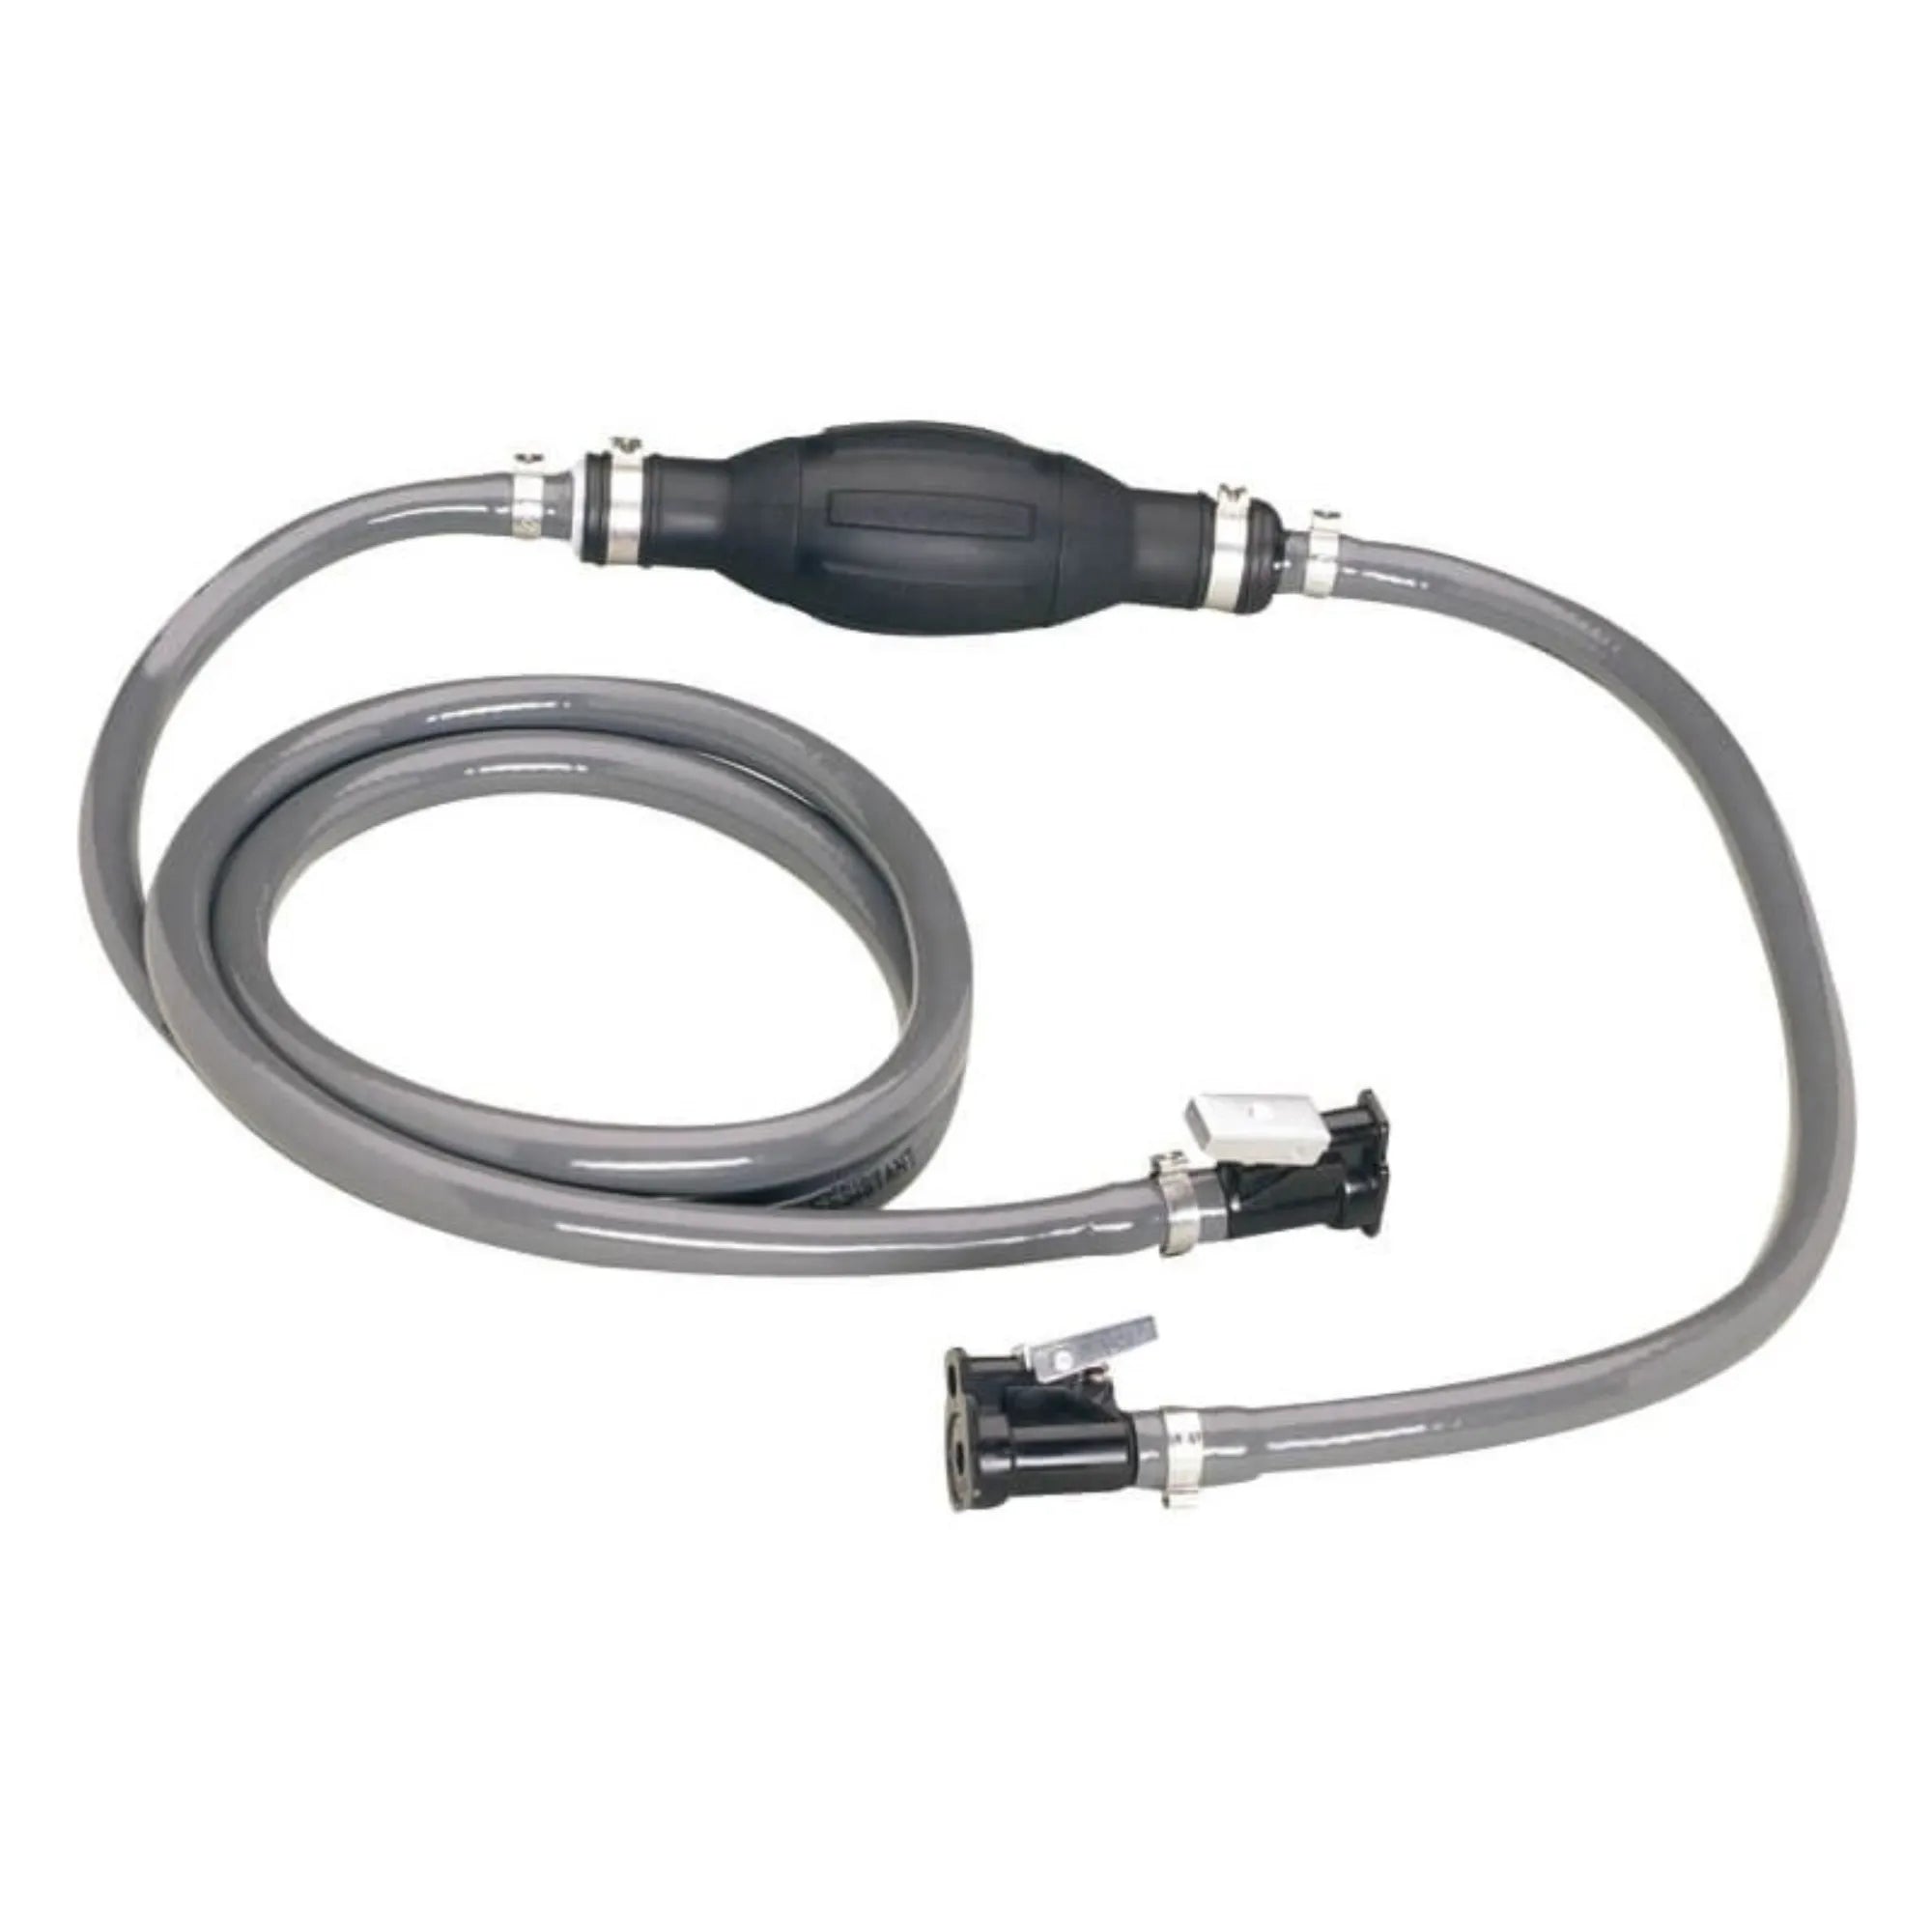 OMC Fuel Link Kit with Primer Bulb